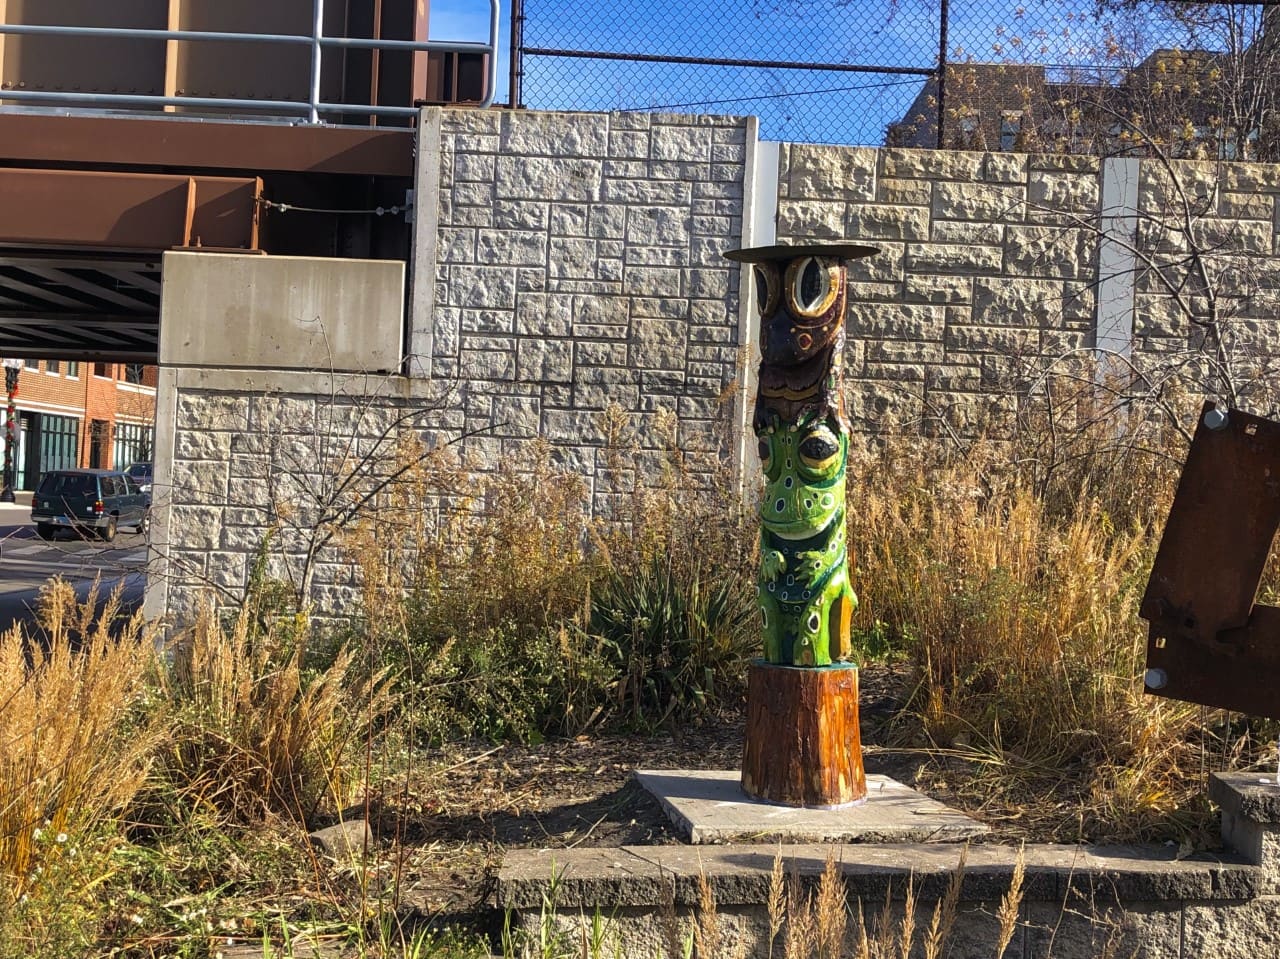 A totemic Frog and Toad sculture install